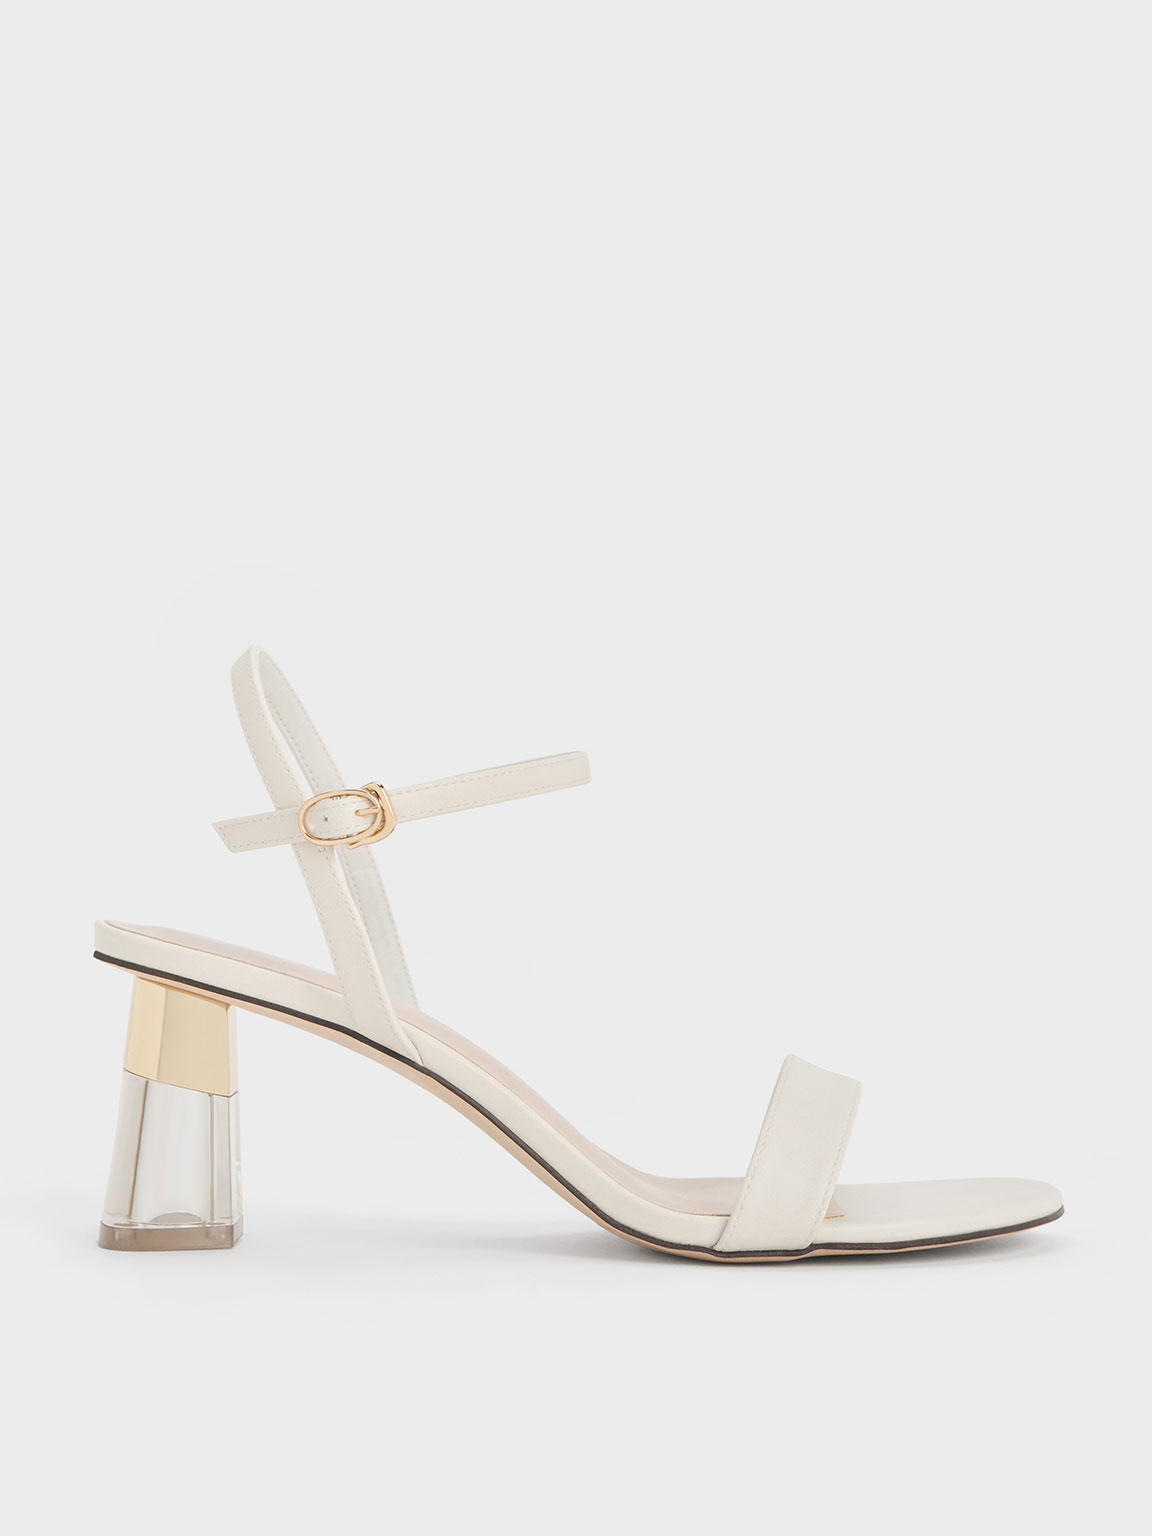 Nude Sepphe Grommet Patent Slingback Pumps - CHARLES & KEITH IN